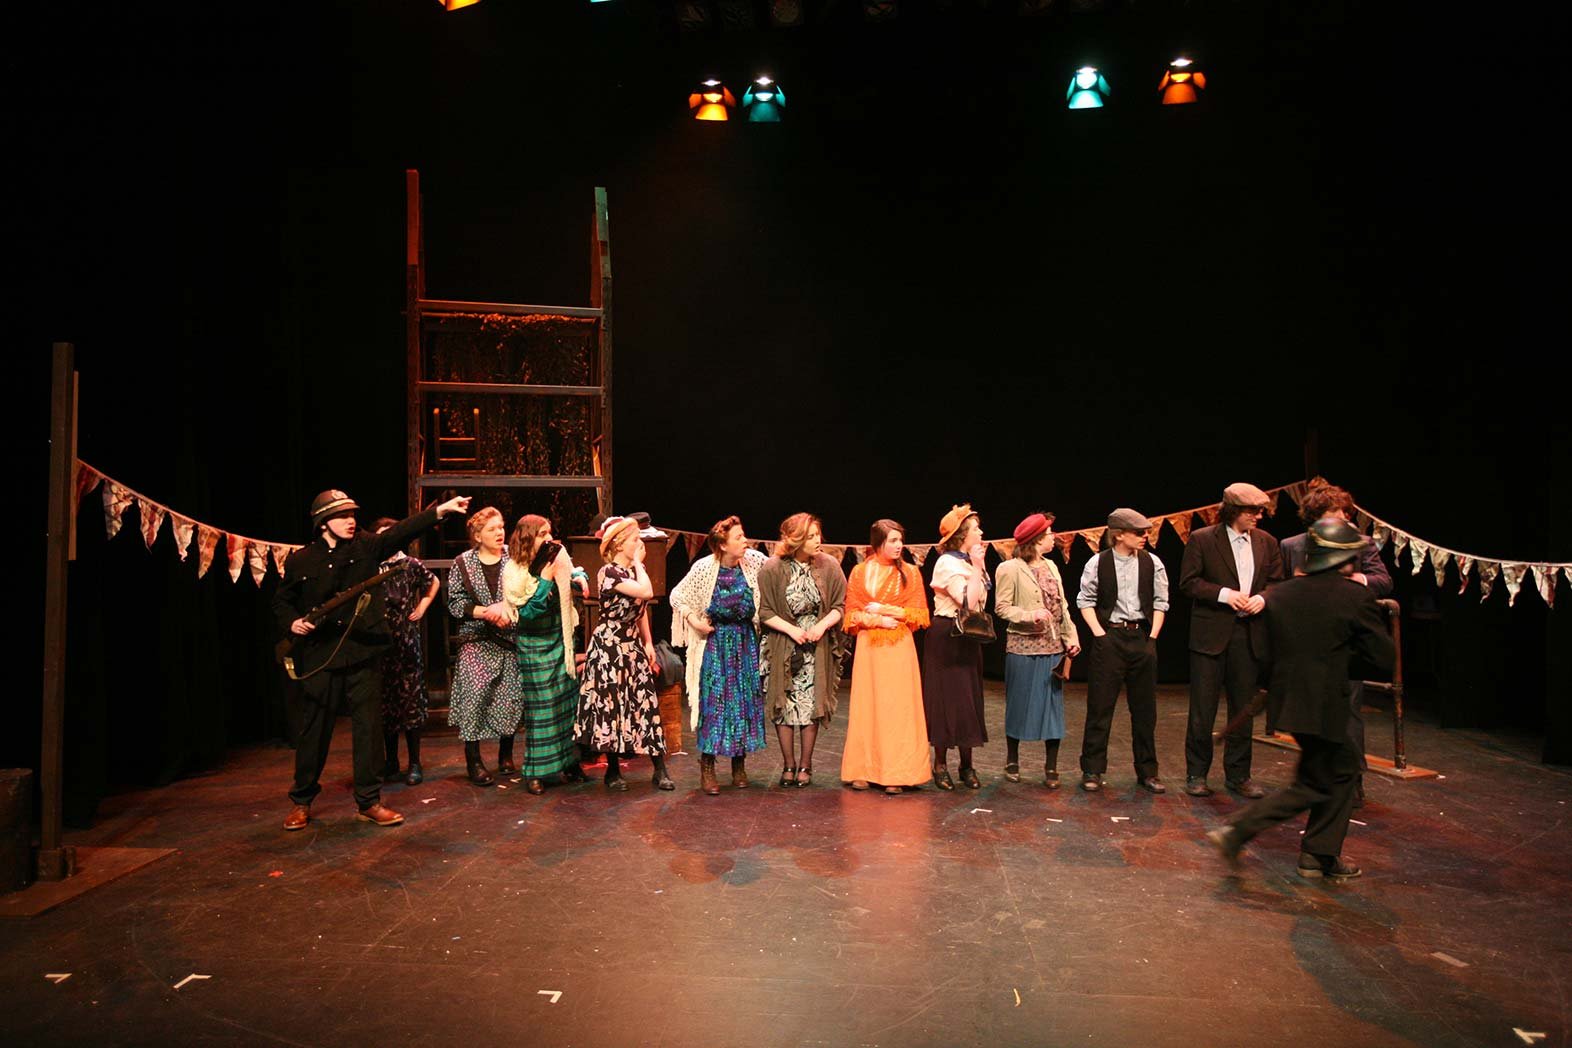 If I was in the GPO we would have won - Roscommon County Youth Theatre